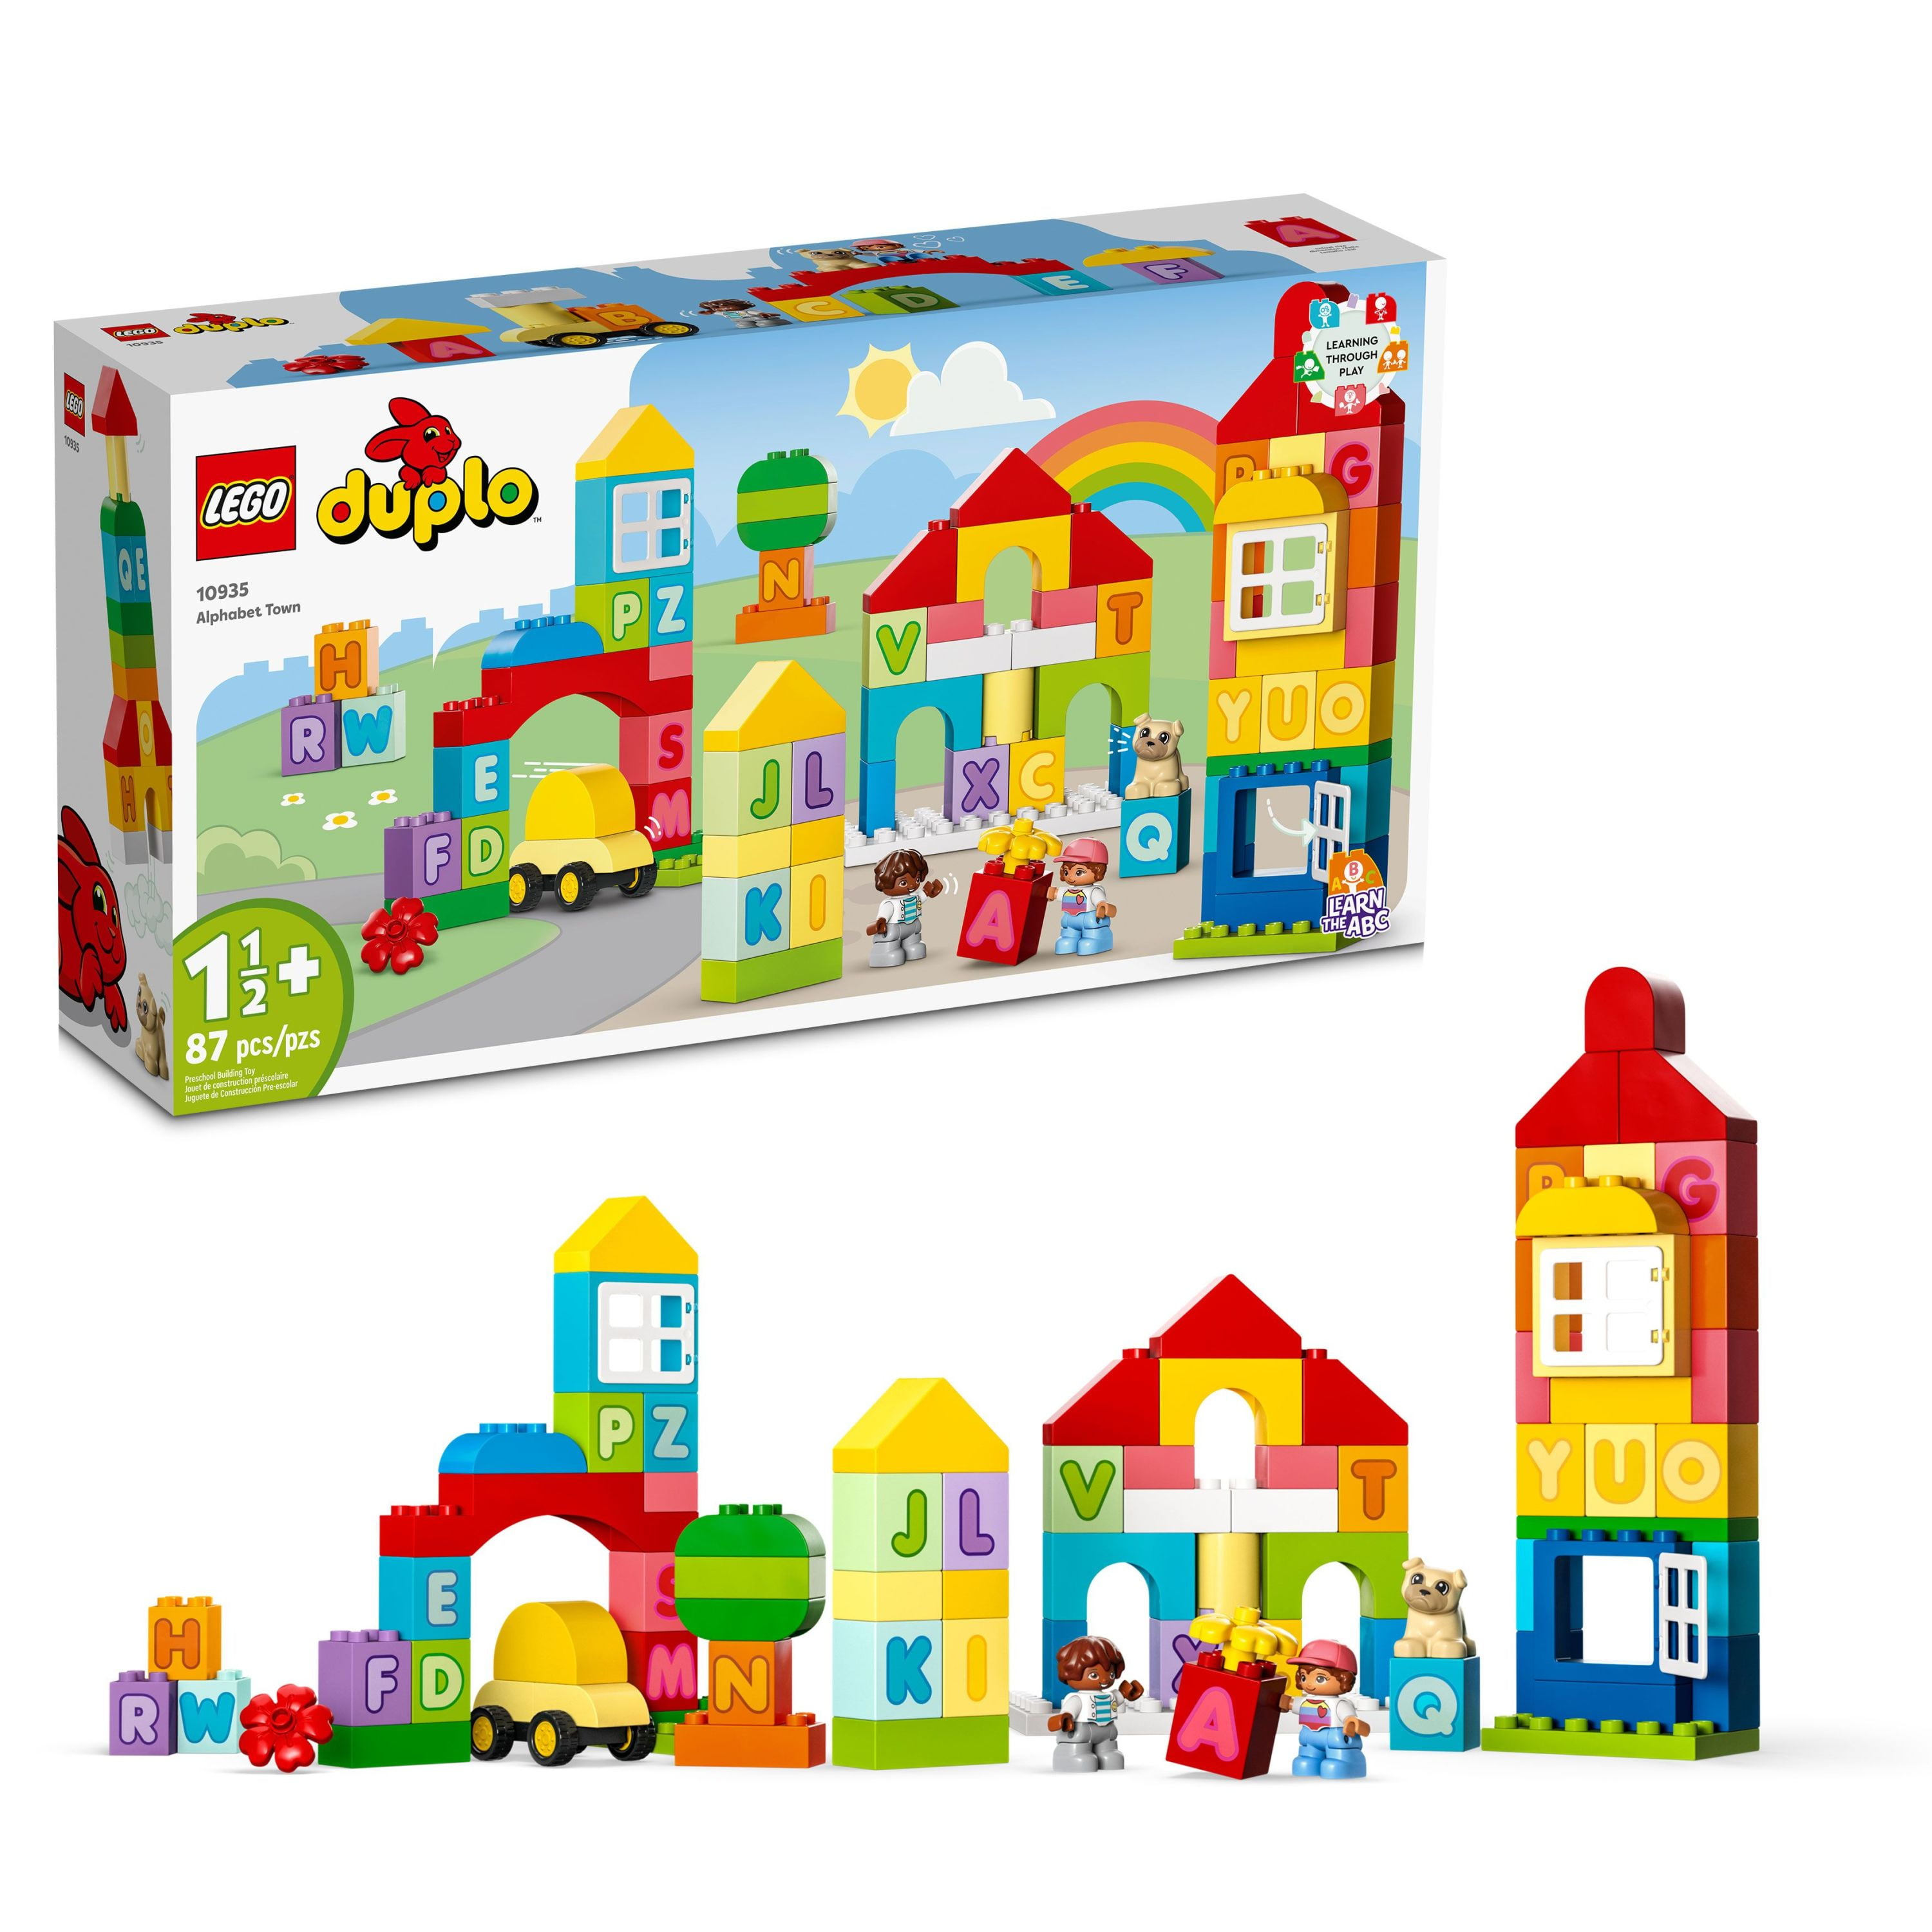 LEGO DUPLO Classic Alphabet Town 10935, Early Learning Toys for & Toddlers, Learn Colors, Letters and Shapes with Large Bricks, Interactive Building Toy for Preschool Kids - Walmart.com